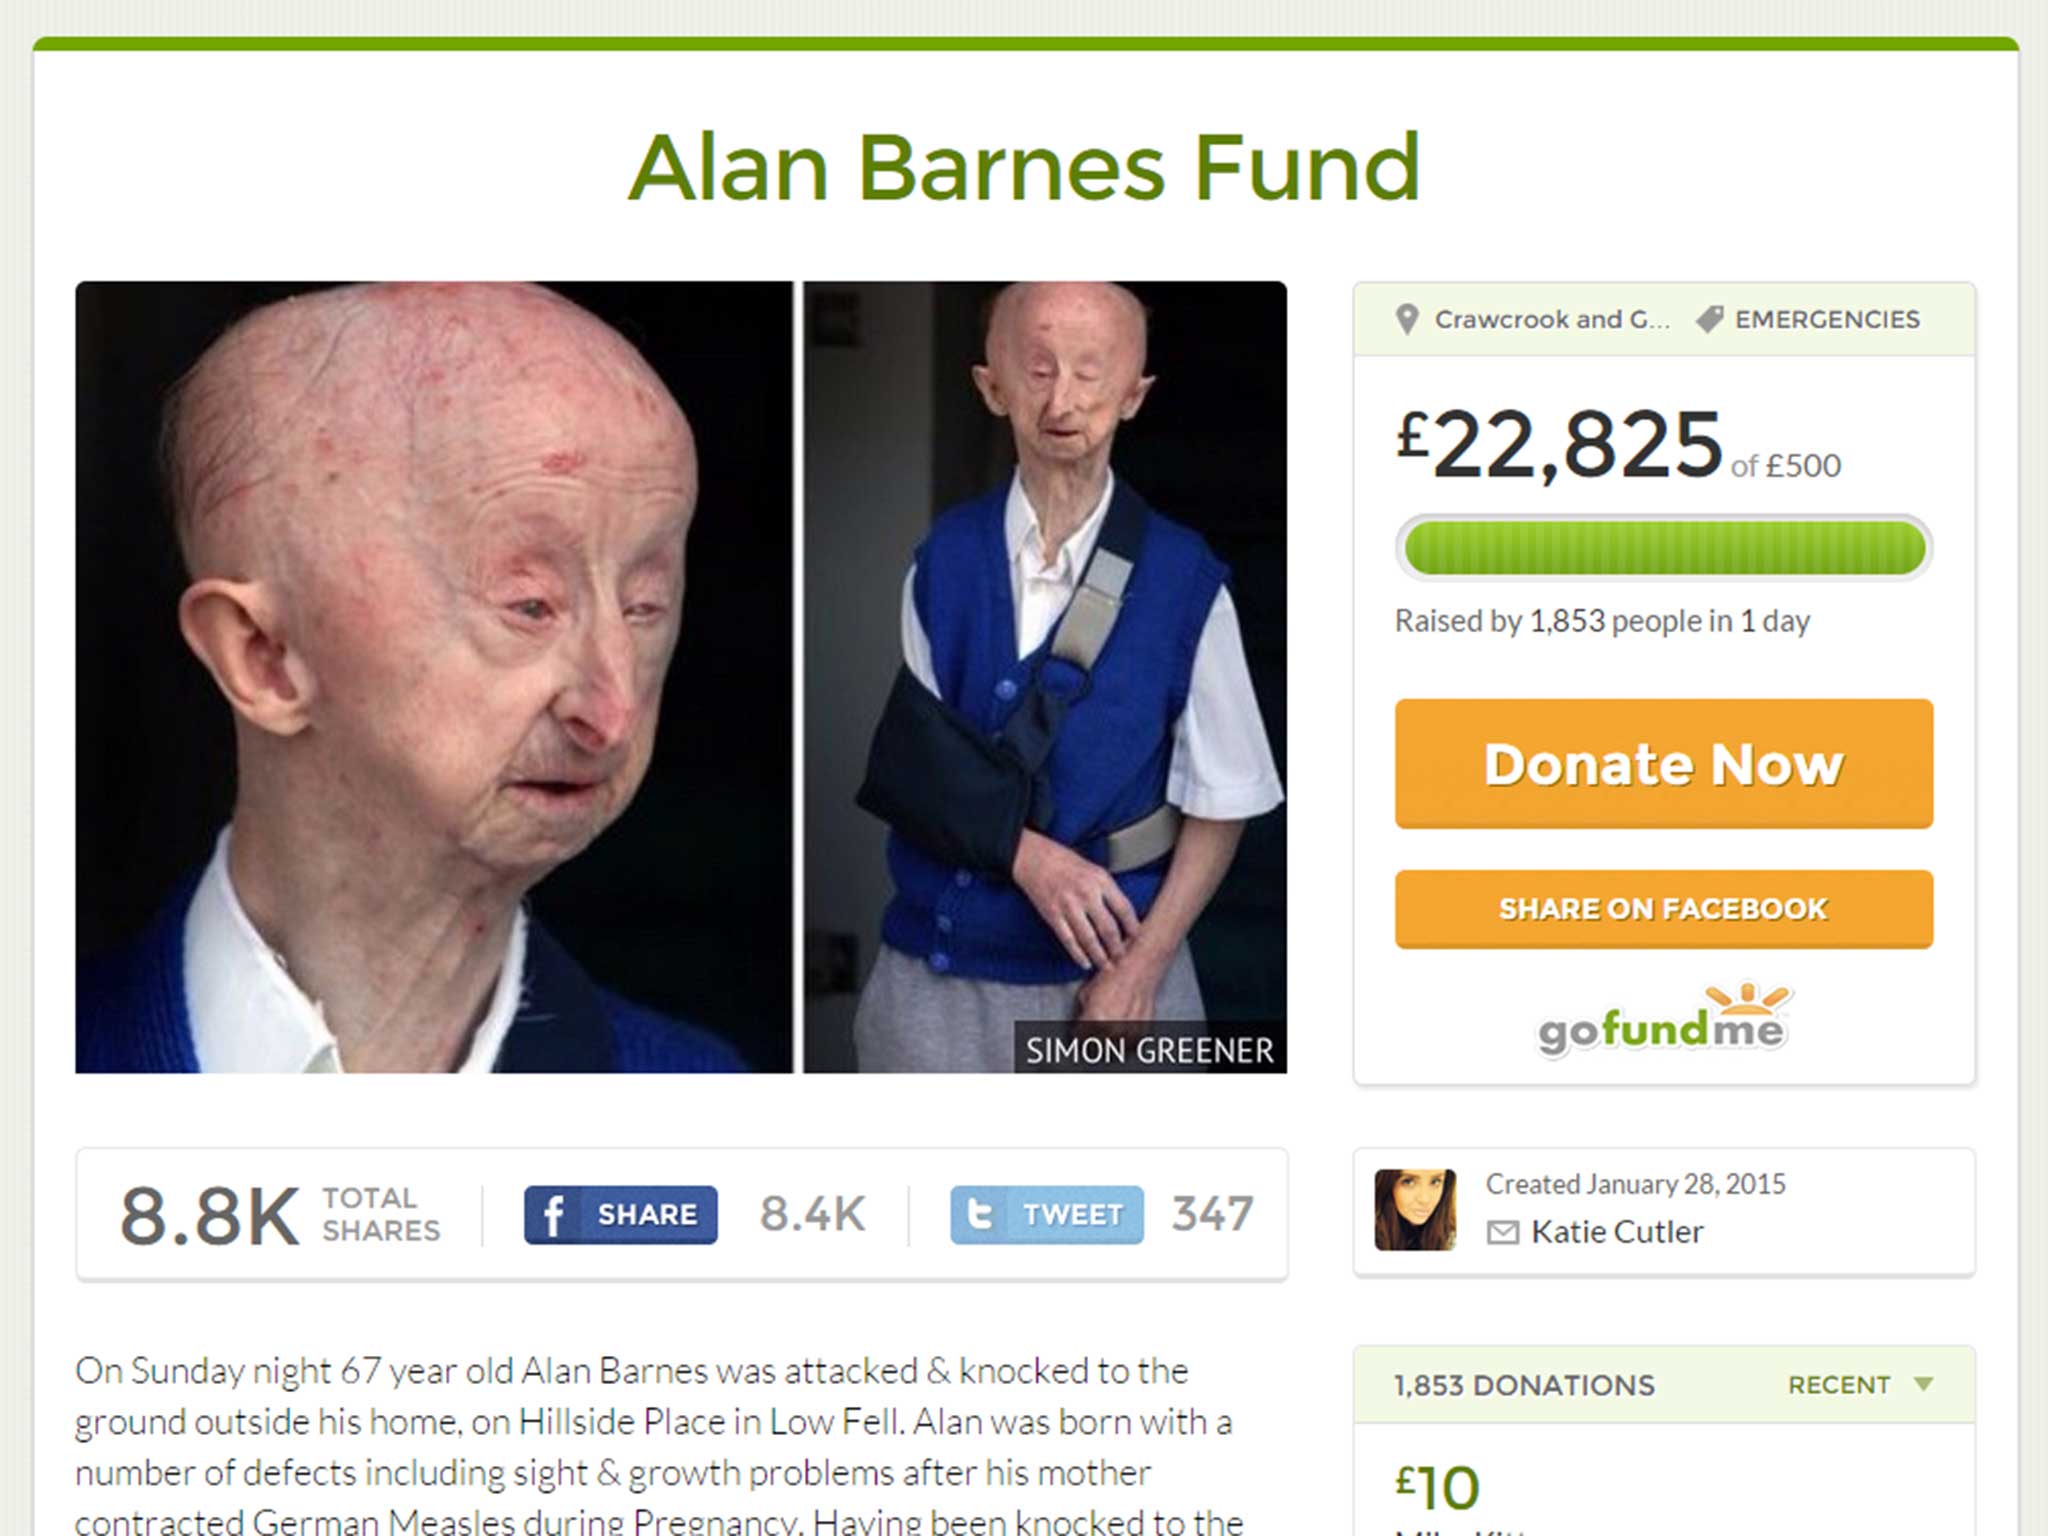 Ms Cutler's page set up for Alan Barnes